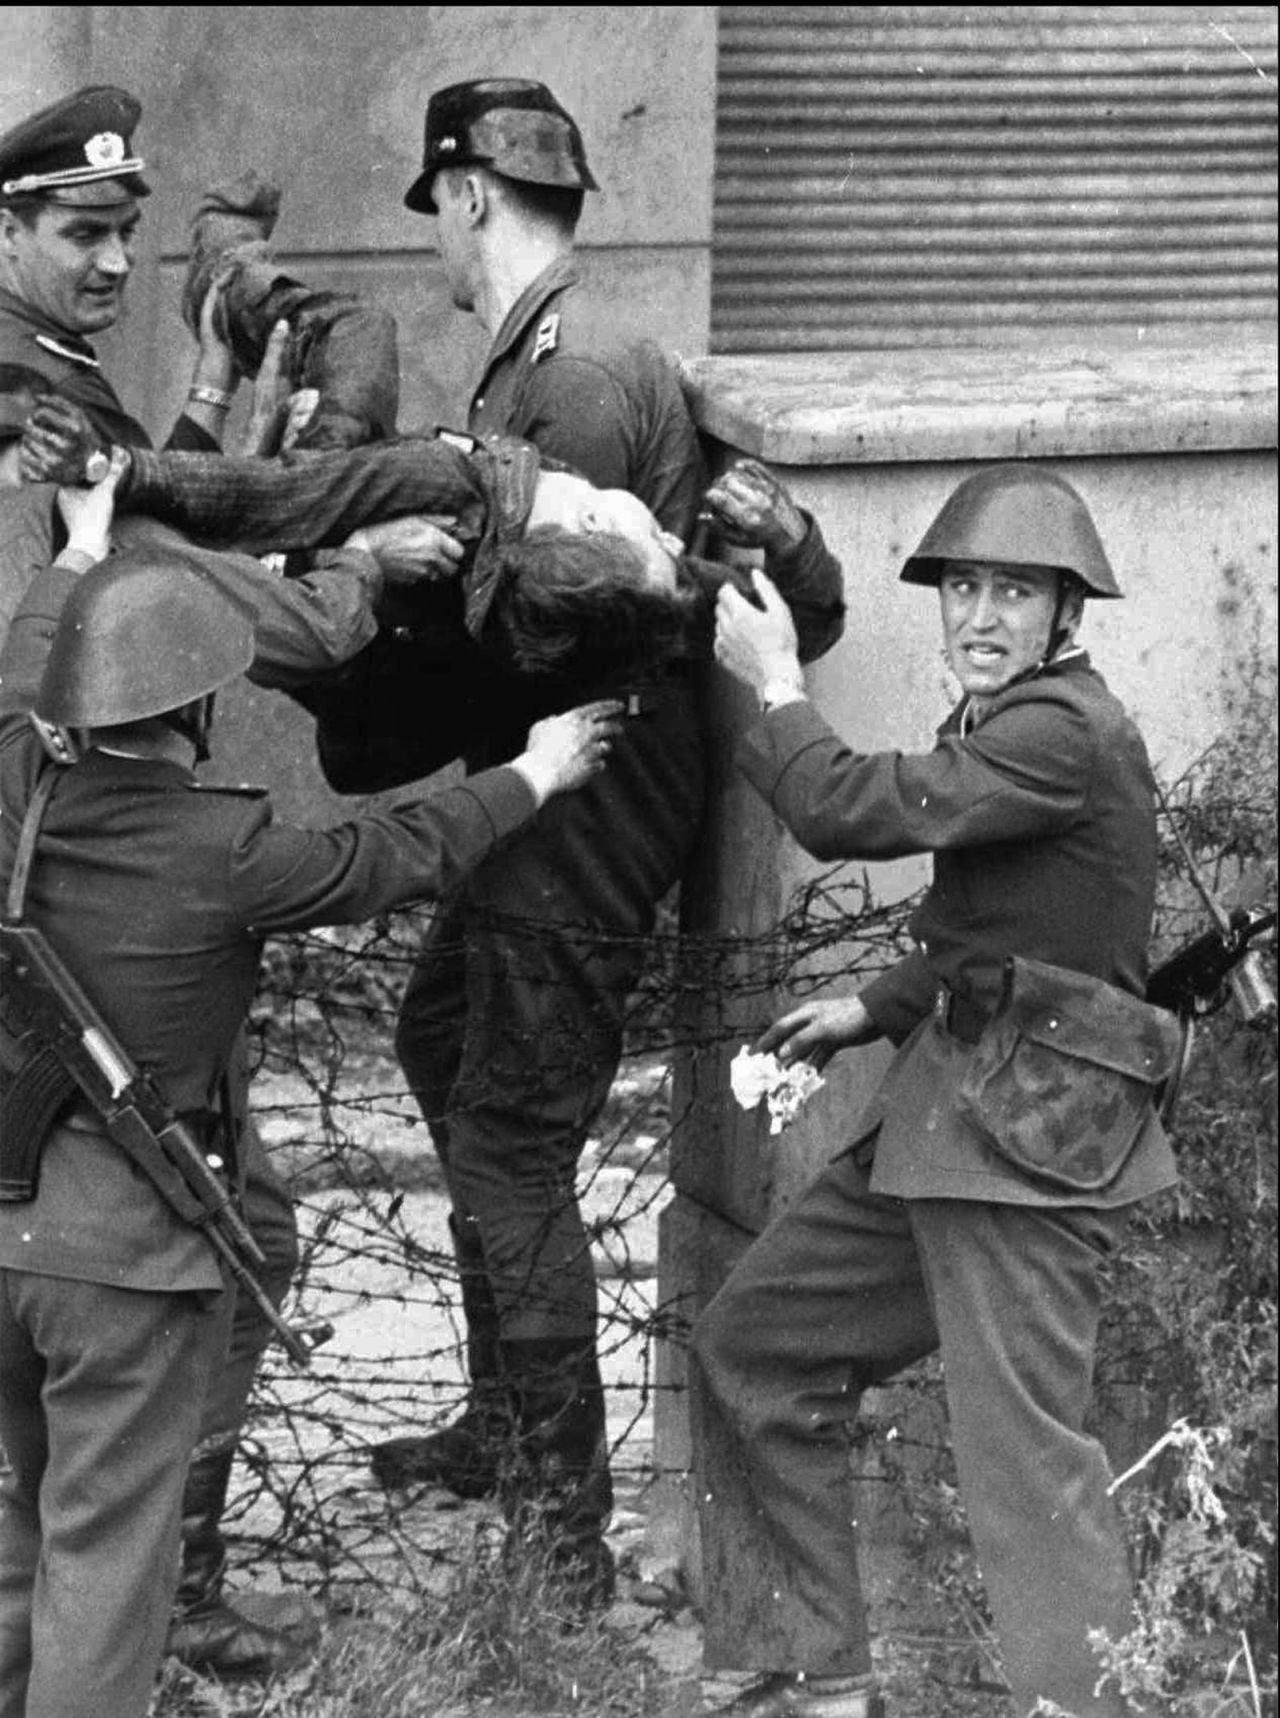 East German bricklayer Peter Fechter, 18, is carried away by border guards after being shot and fatally wounded while attempting to flee to the West in August, 1962. <a href="https://www.britannica.com/topic/Berlin-Wall" target="_blank" target="_blank">Almost 200 </a>people were killed attempting to cross the Wall between 1961 and 1989.